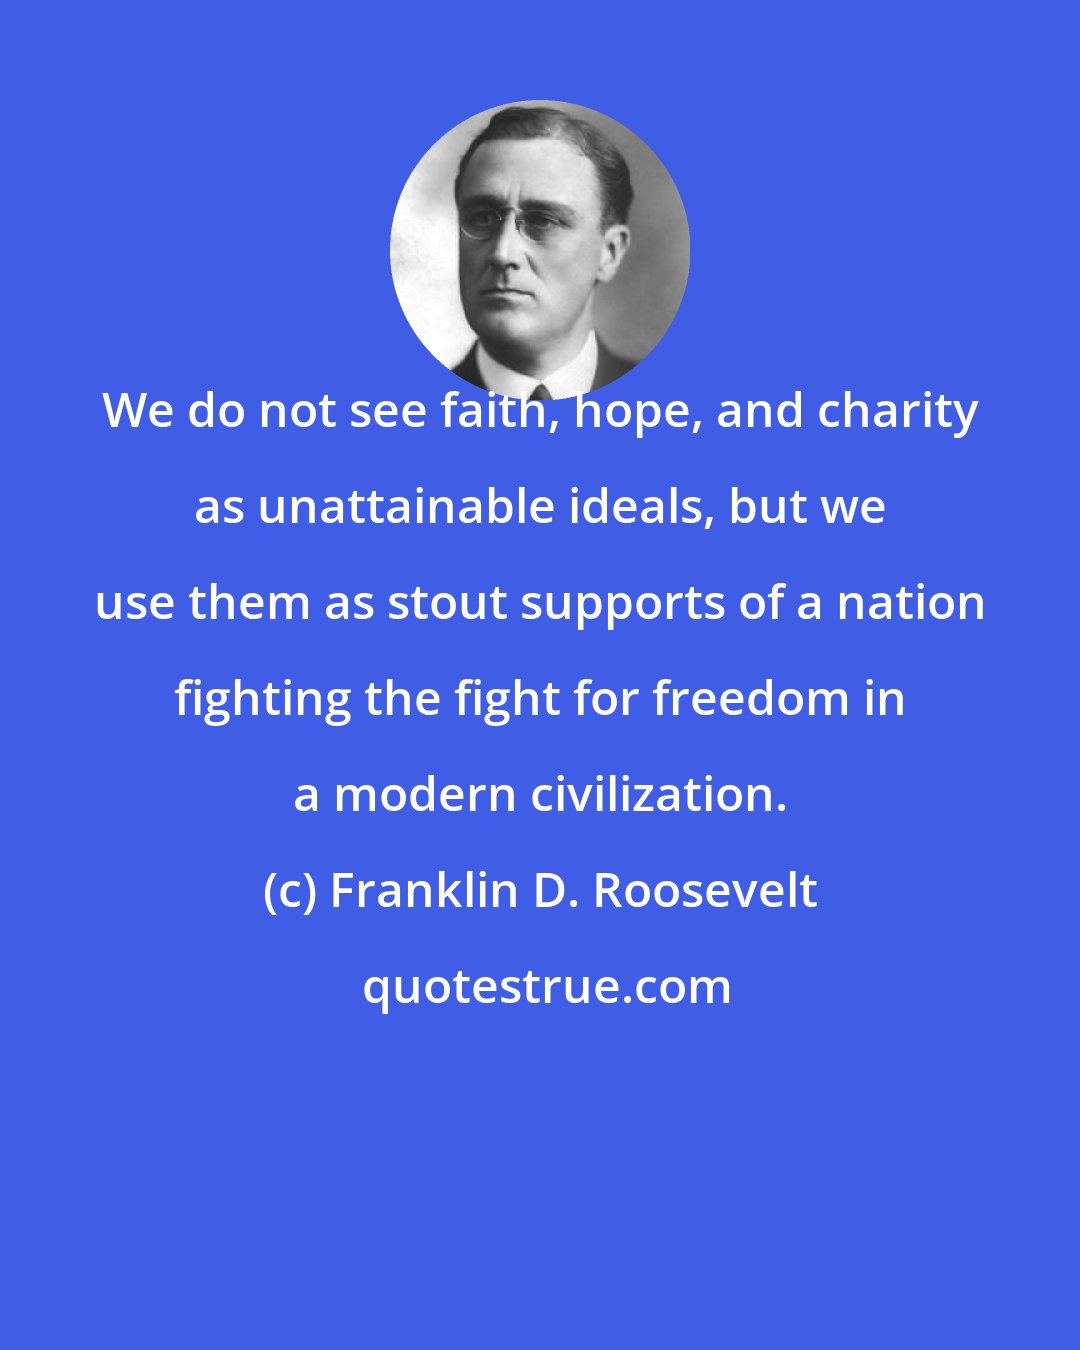 Franklin D. Roosevelt: We do not see faith, hope, and charity as unattainable ideals, but we use them as stout supports of a nation fighting the fight for freedom in a modern civilization.